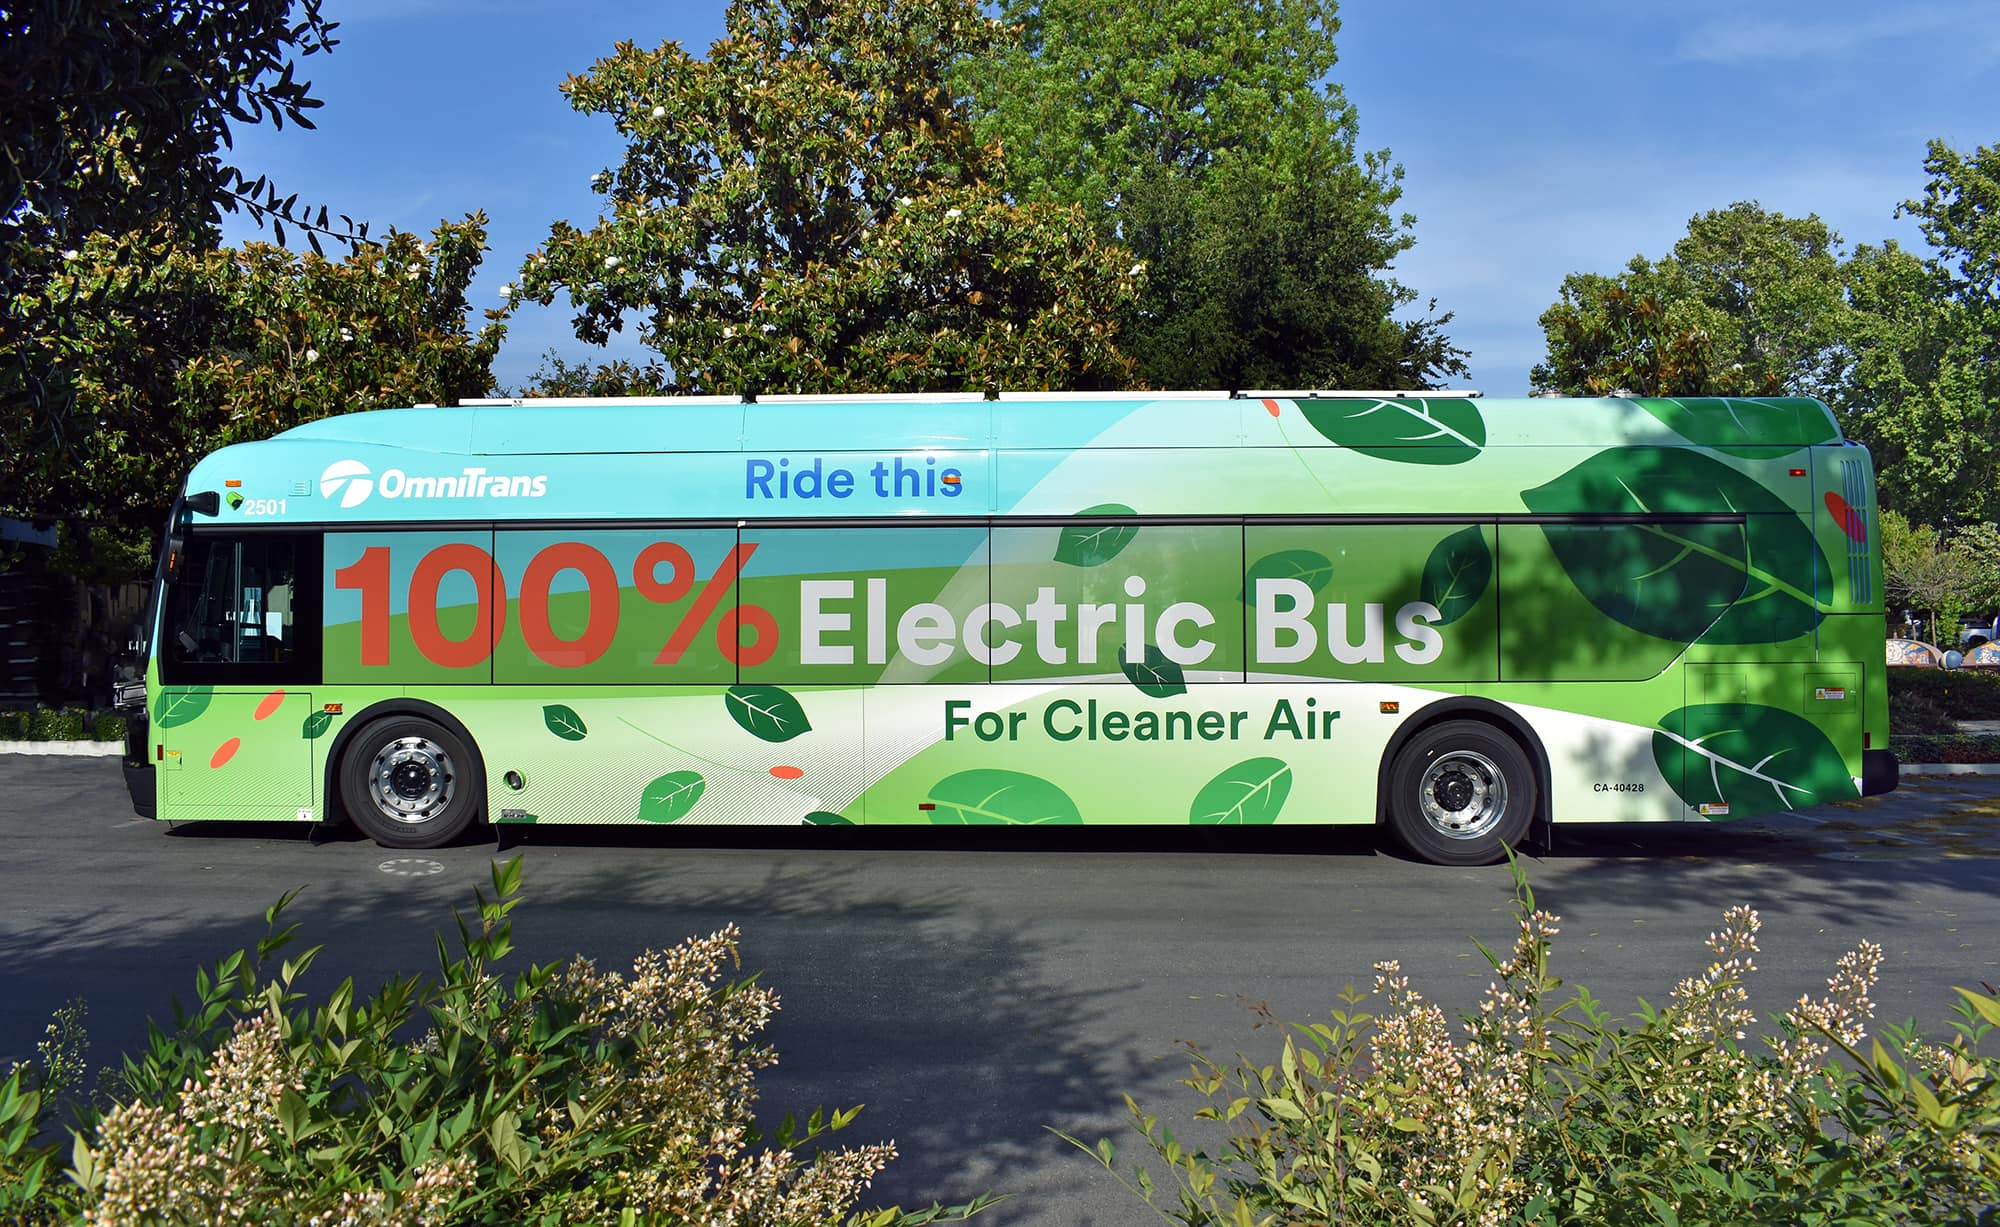 On the Road to Zero: Celebrate the Launch of Our New 100% Electric Buses!